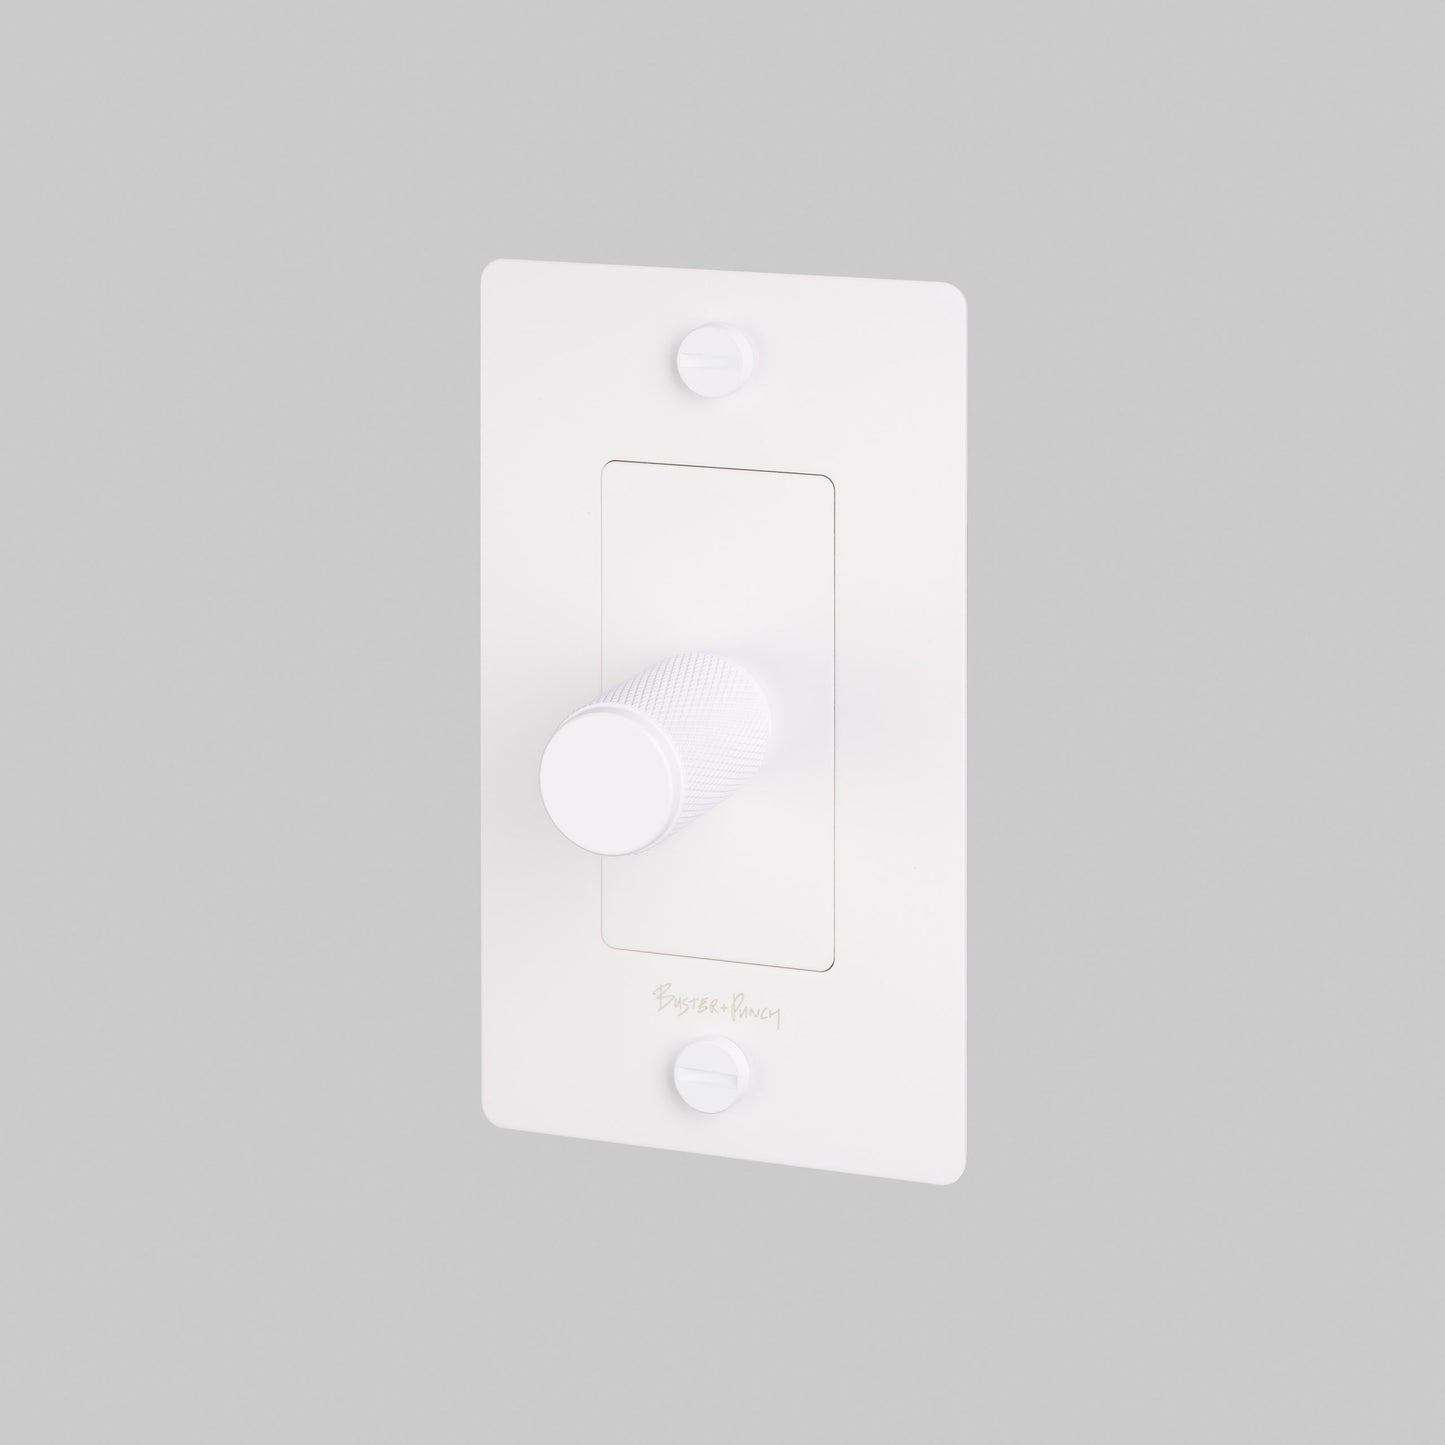 BUSTER AND PUNCH | 1G DIMMER $141.00 - $146.00